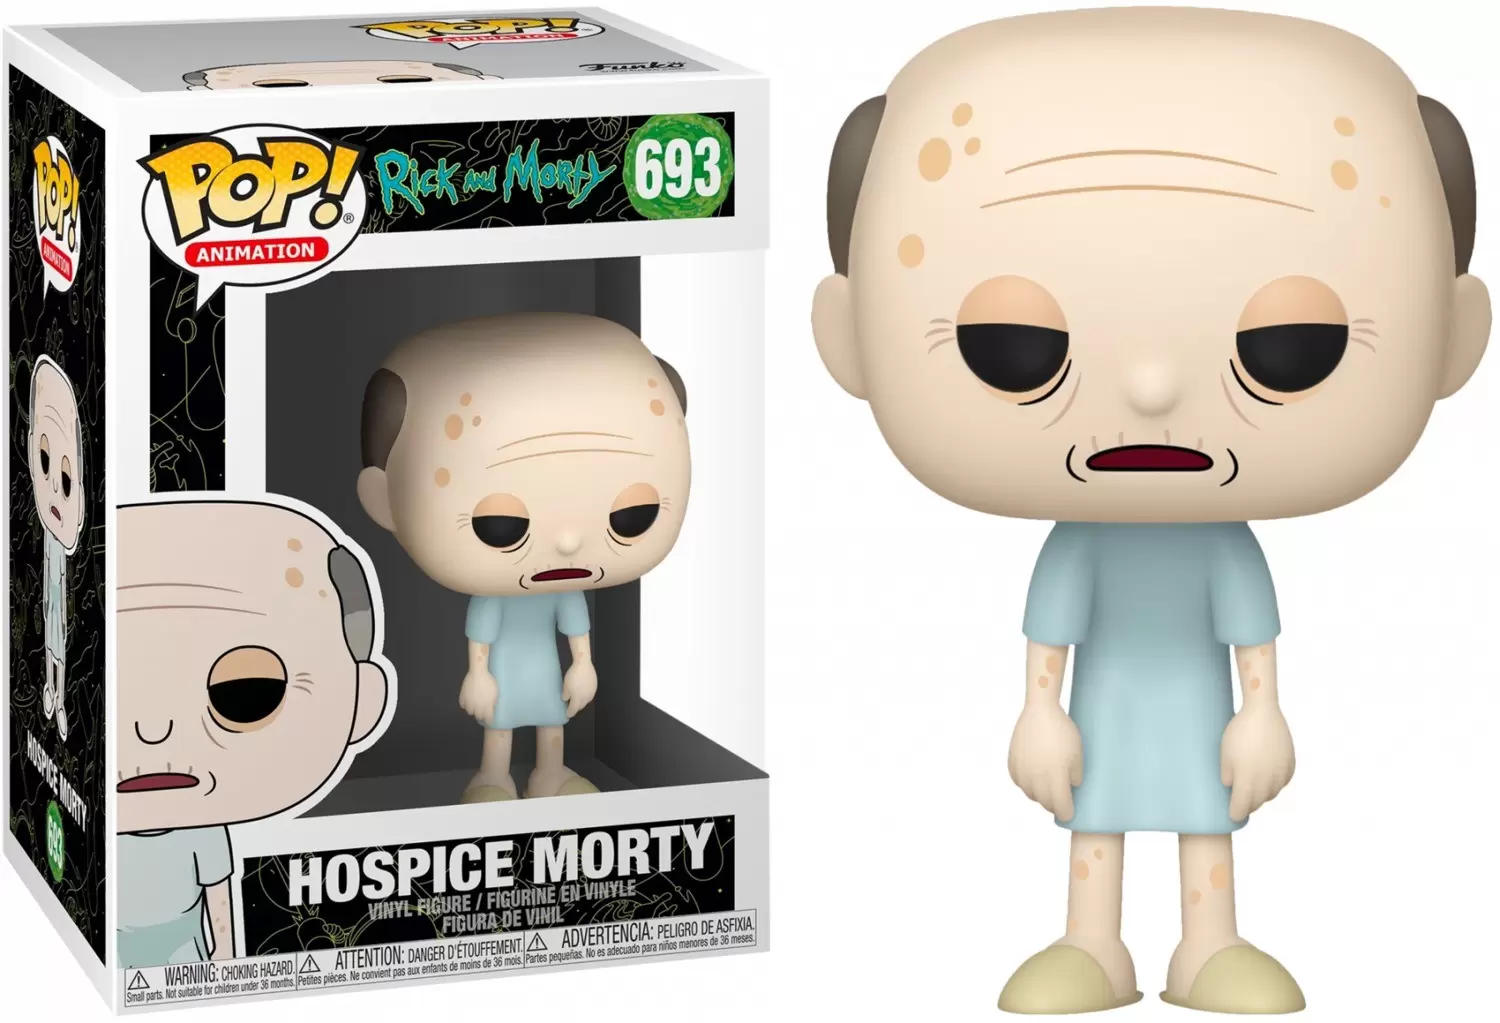 POP! Animation - Rick and Morty - Hospice Morty